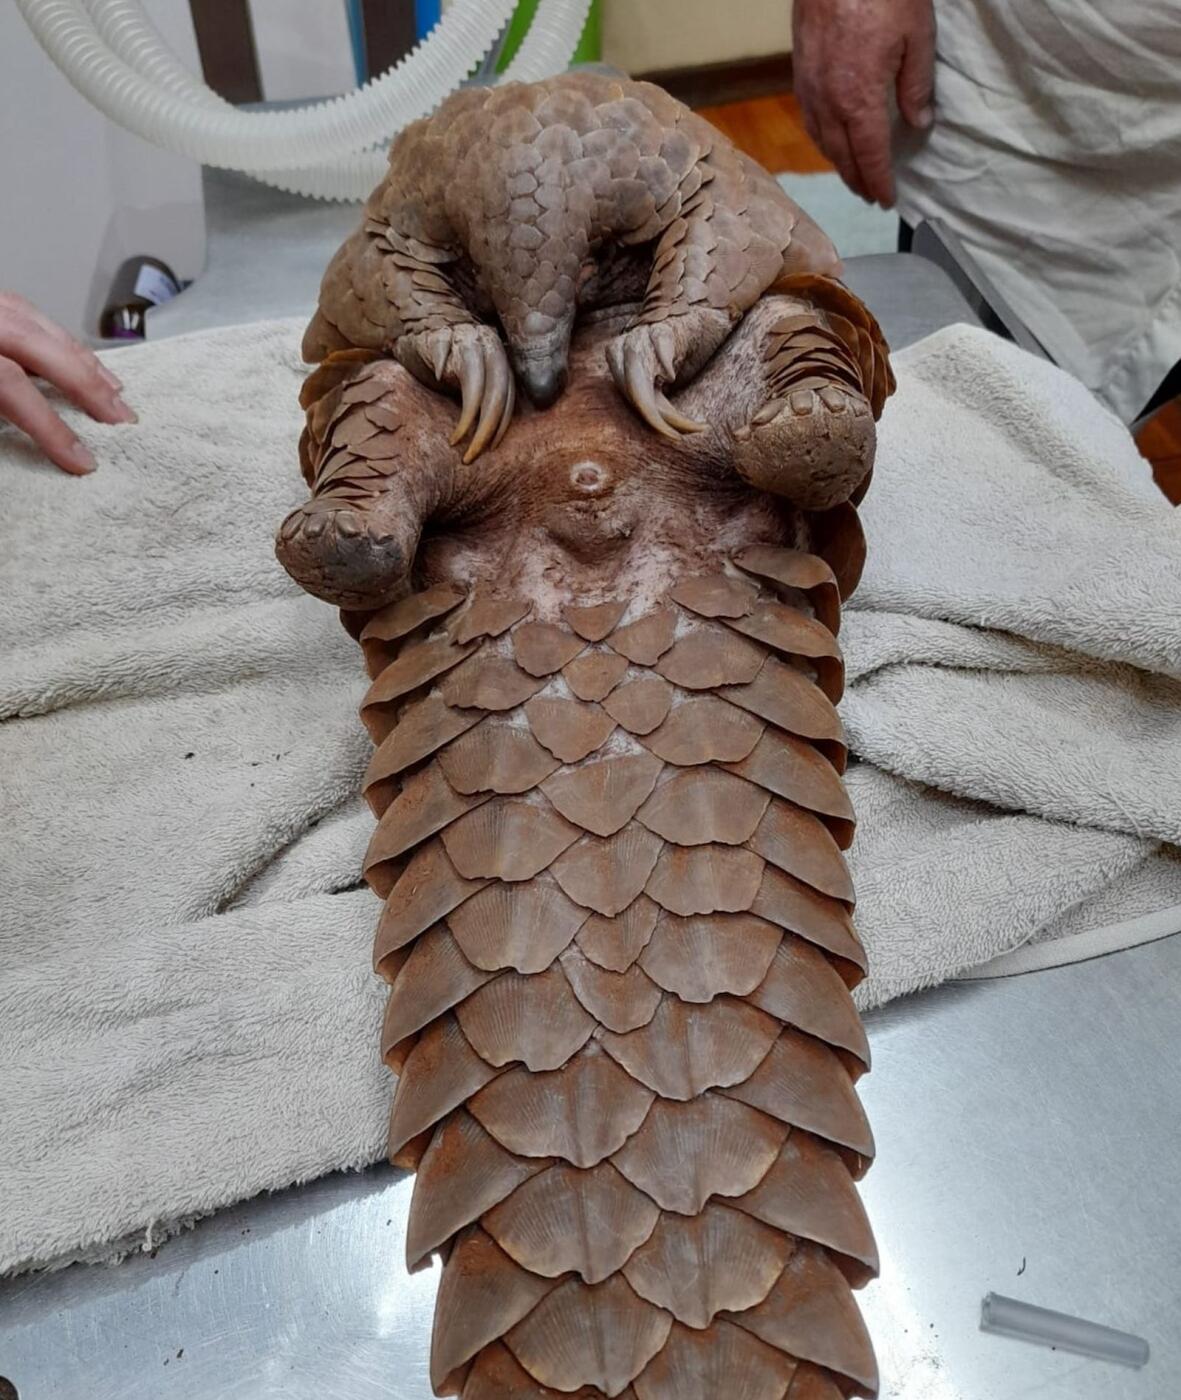 An accused suspected of being in the illegal possession of a pangolin has been released on a warning after appearing in the Kuruman Magistrate’s Court on Monday. Picture: Supplied